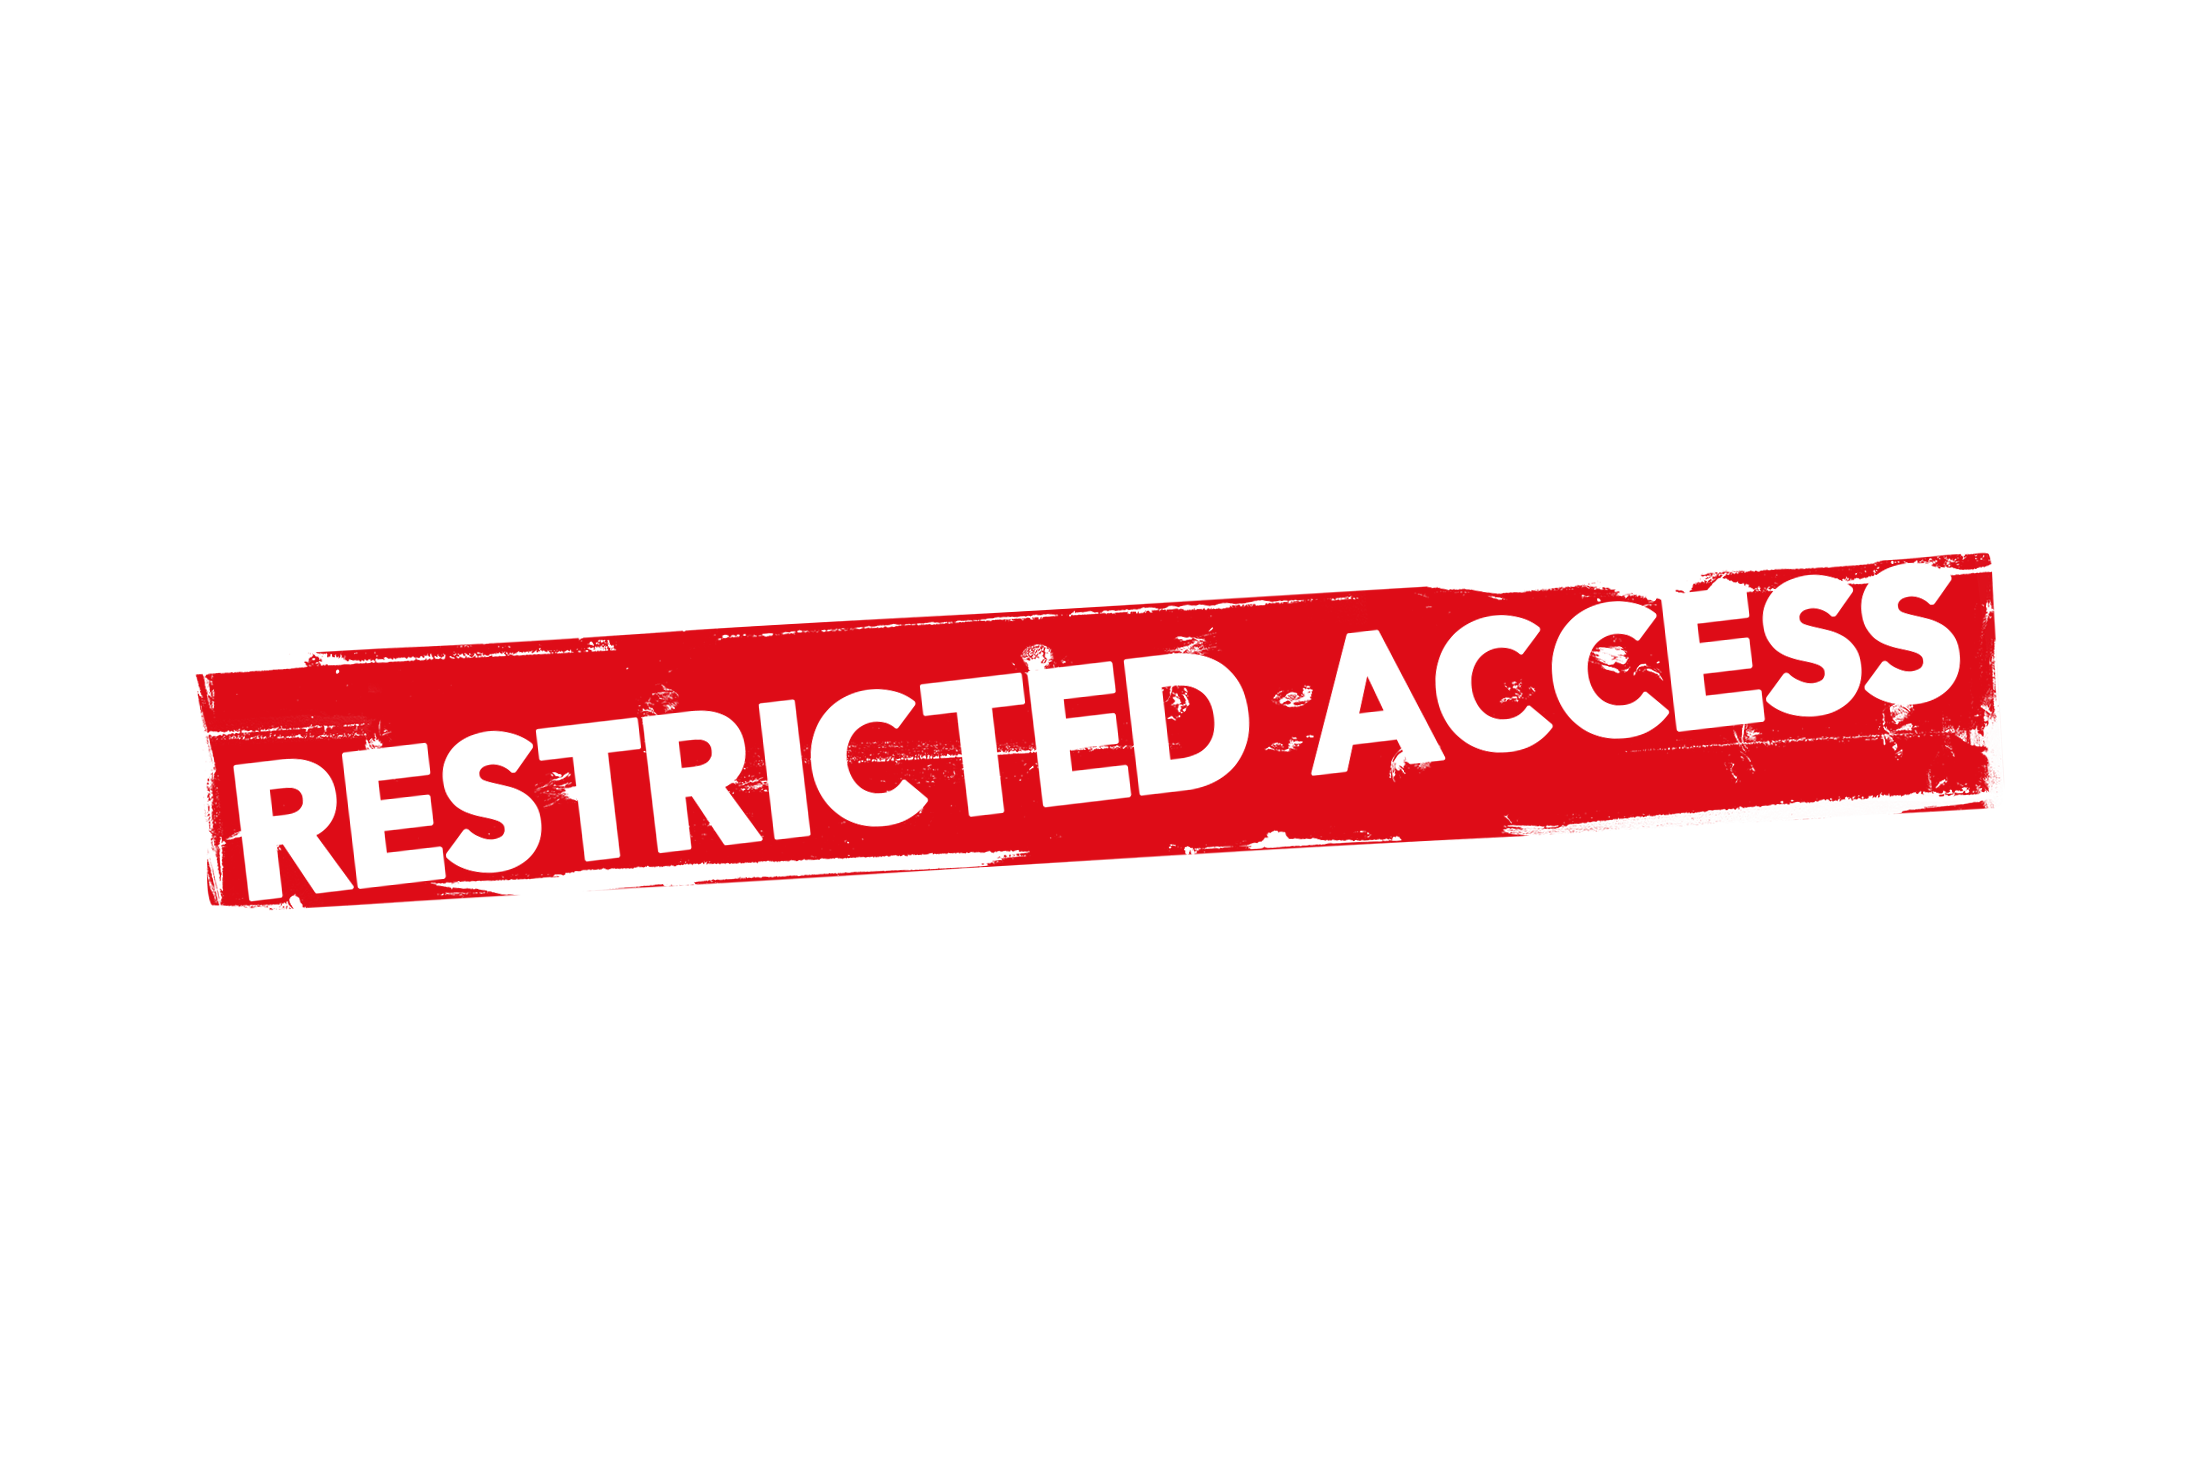 Grunge restricted access label PSD